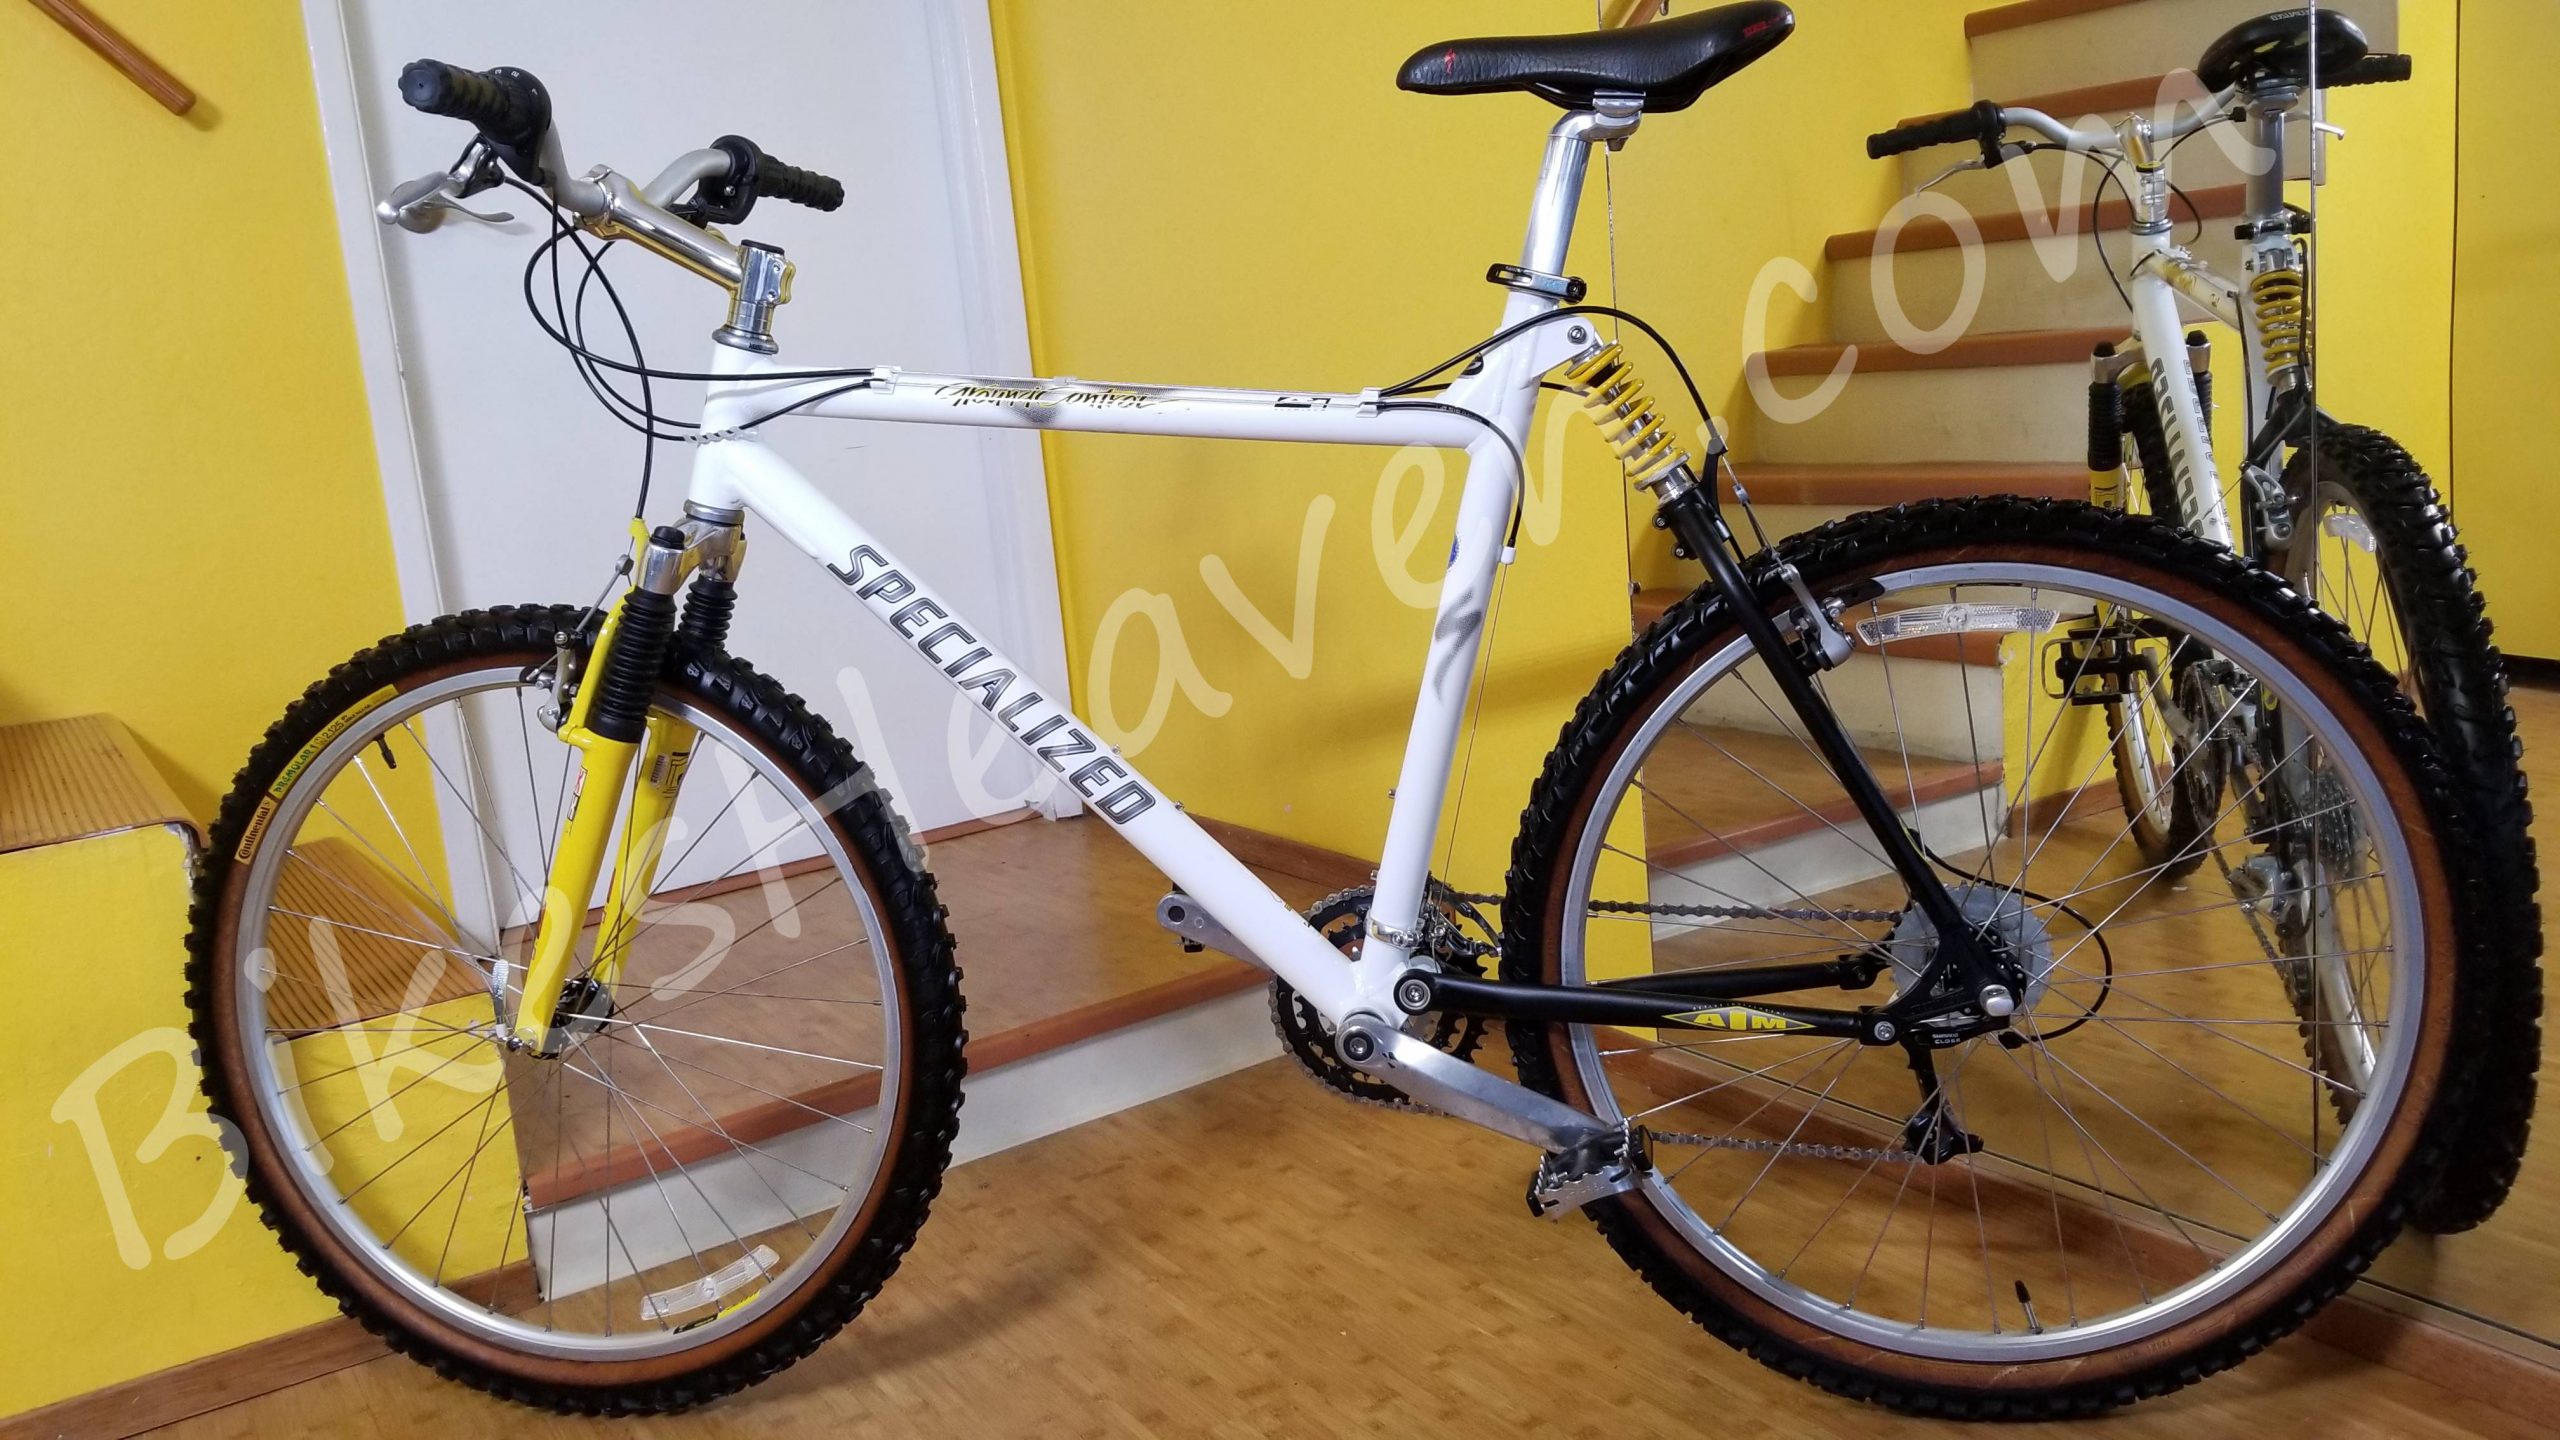 1996 Specialized Ground Control A1 - Bikes Heaven